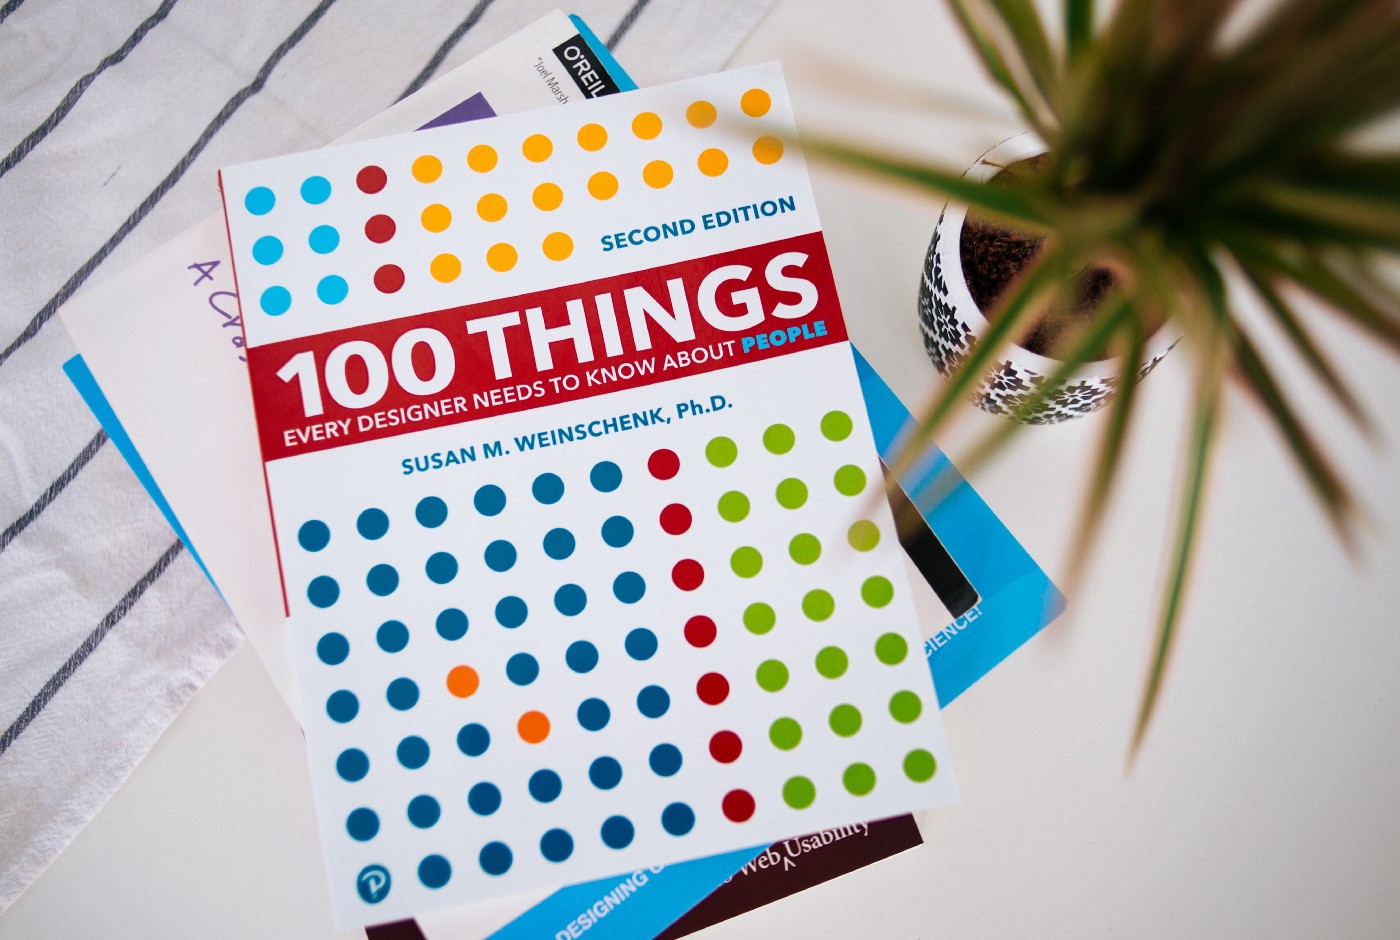 Photo of the book: “100 Things Every Designer Needs to Know About People” by Susan M. Weinschenk - courtesy of Elena Putina